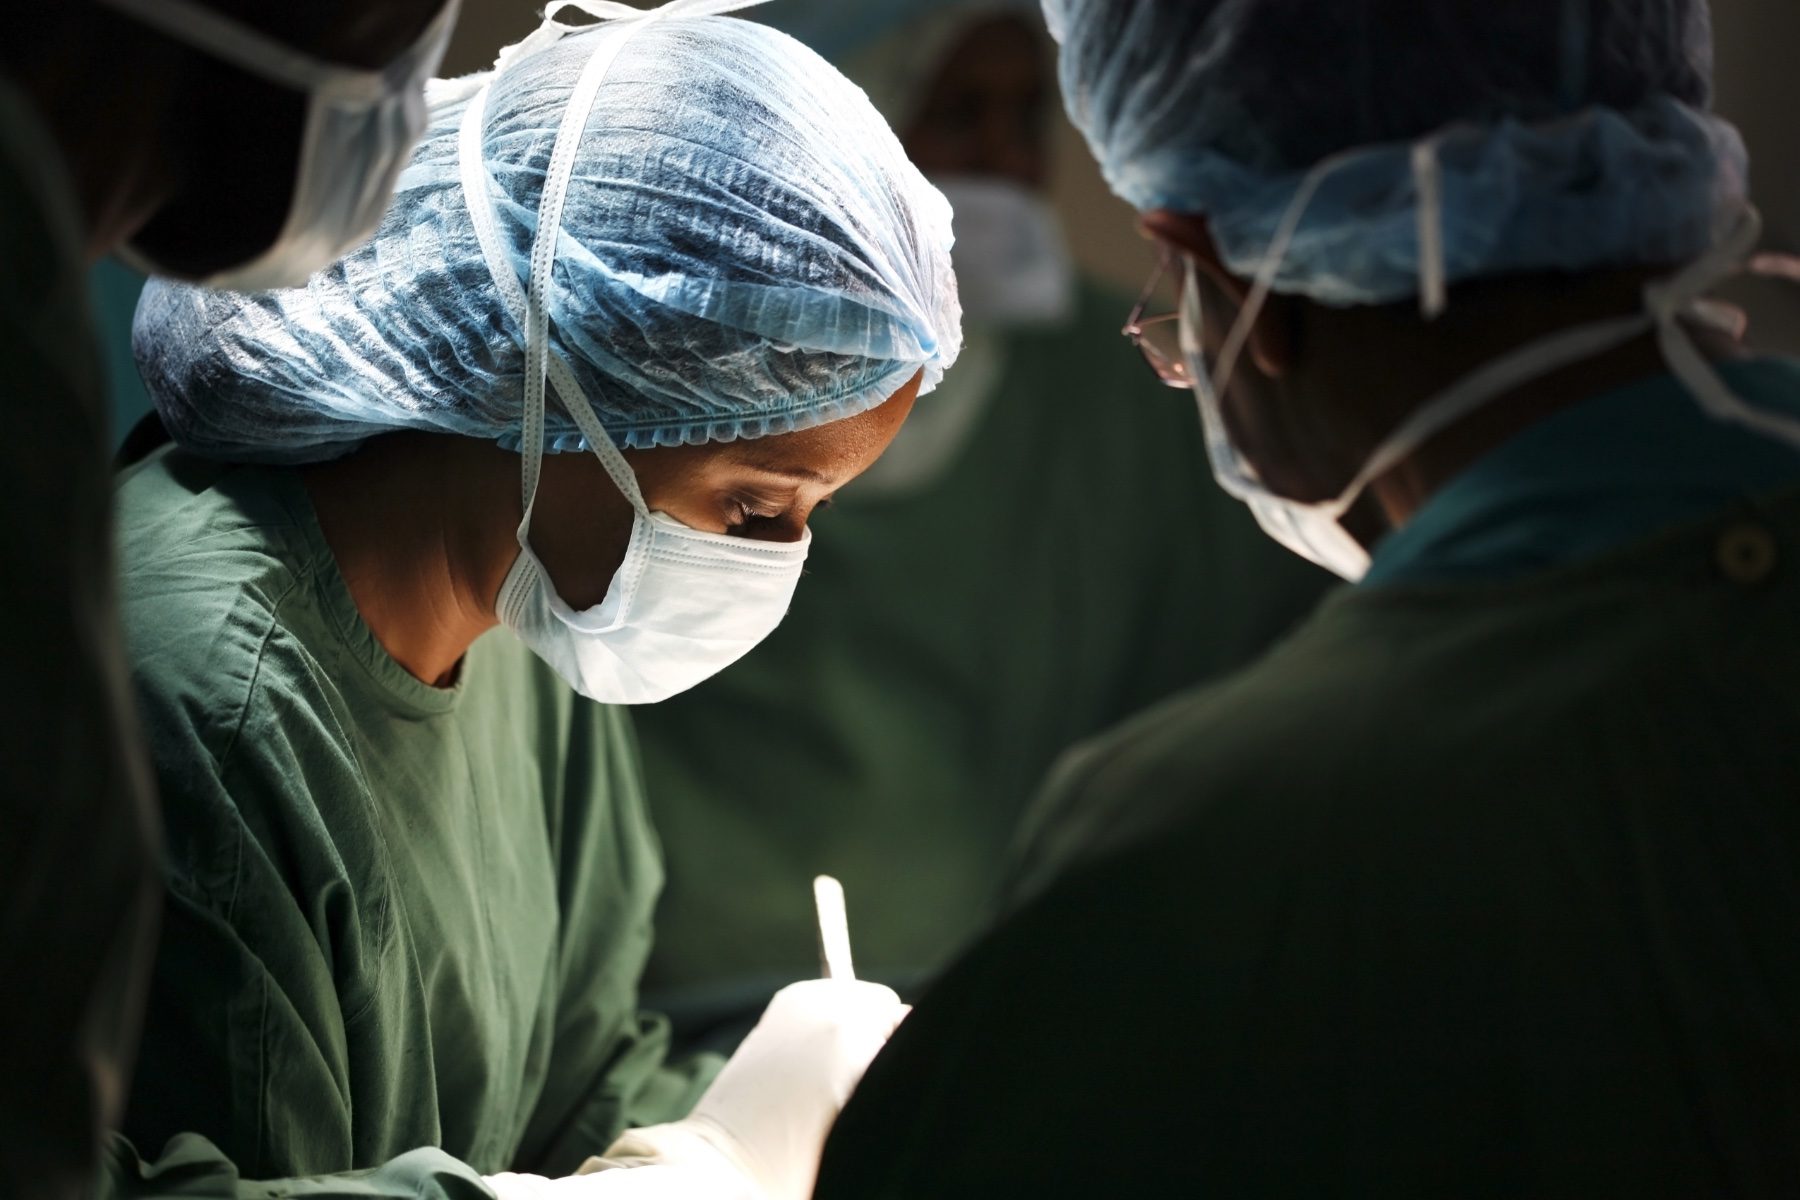 A woman surgeon and her assistants operating on a patient.